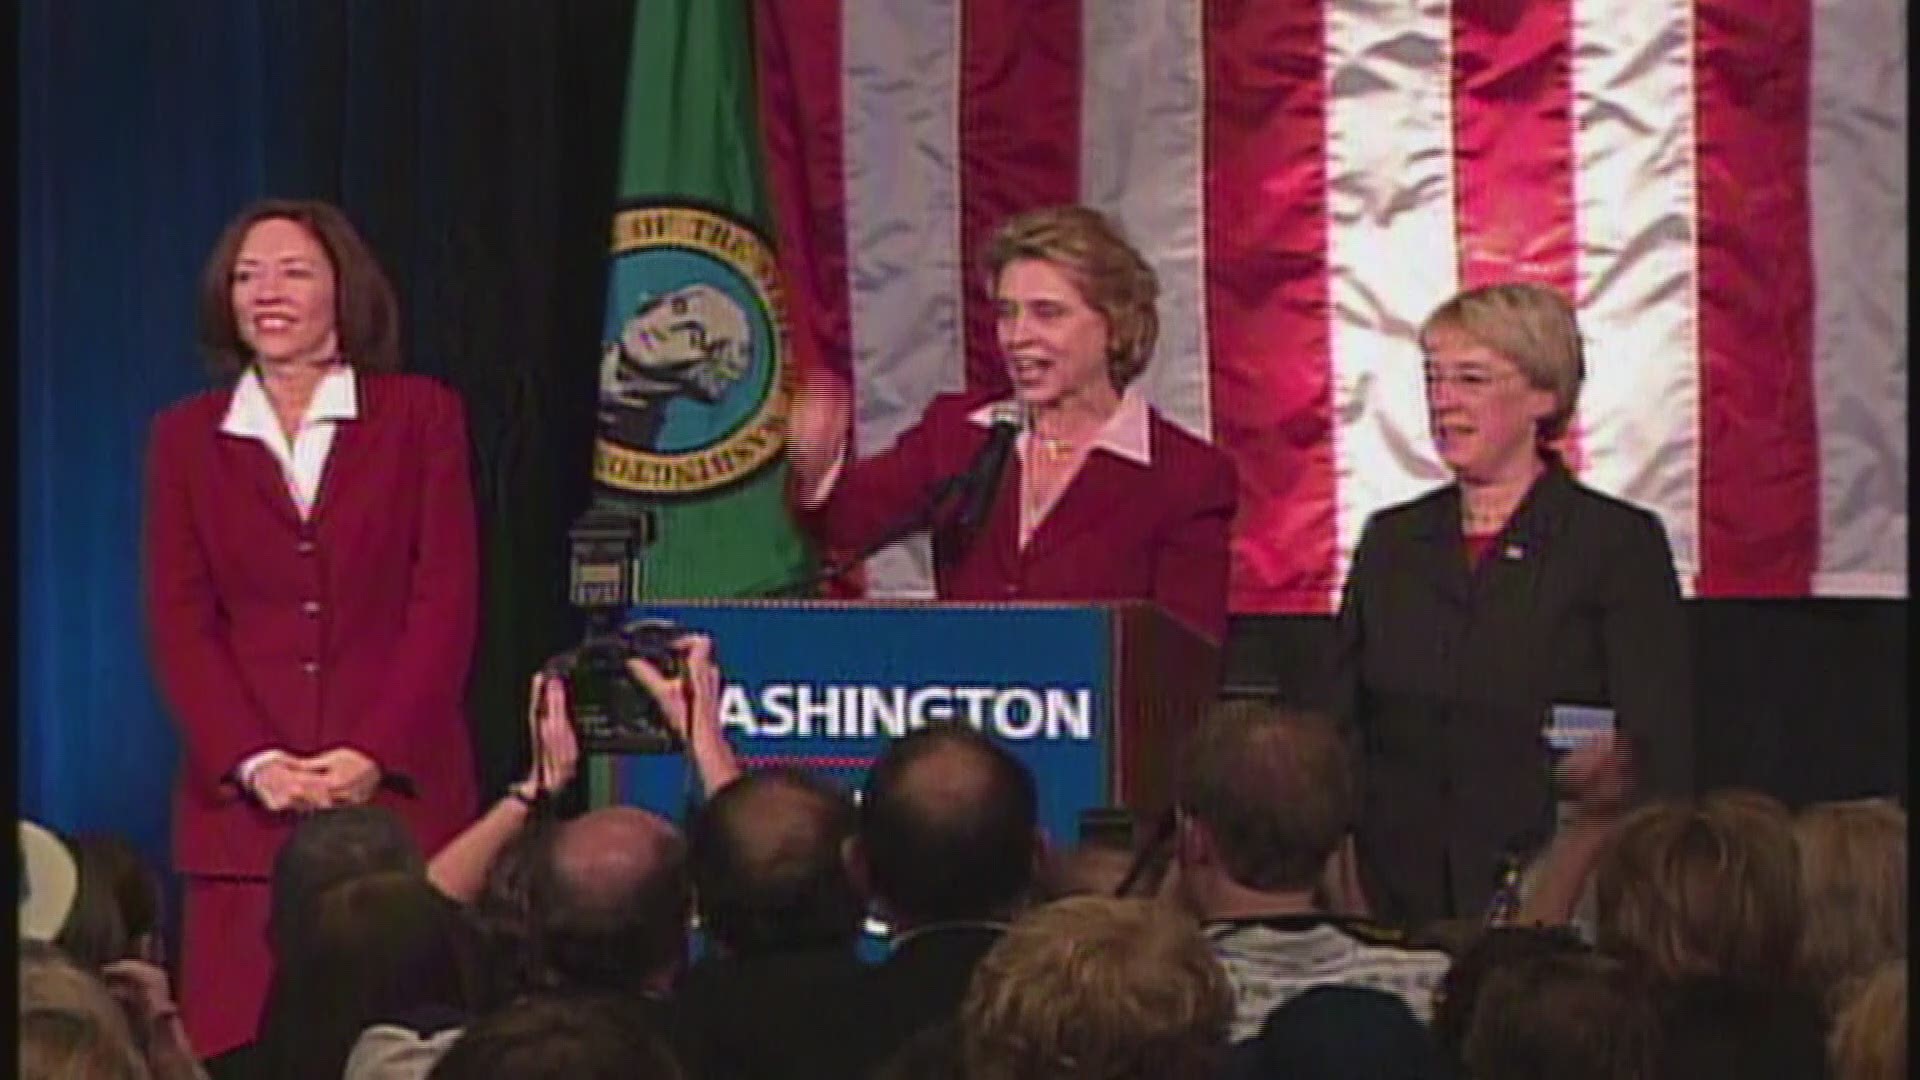 After recounts and court action, Christine Gregoire won the 2004 election by less than 100 votes.